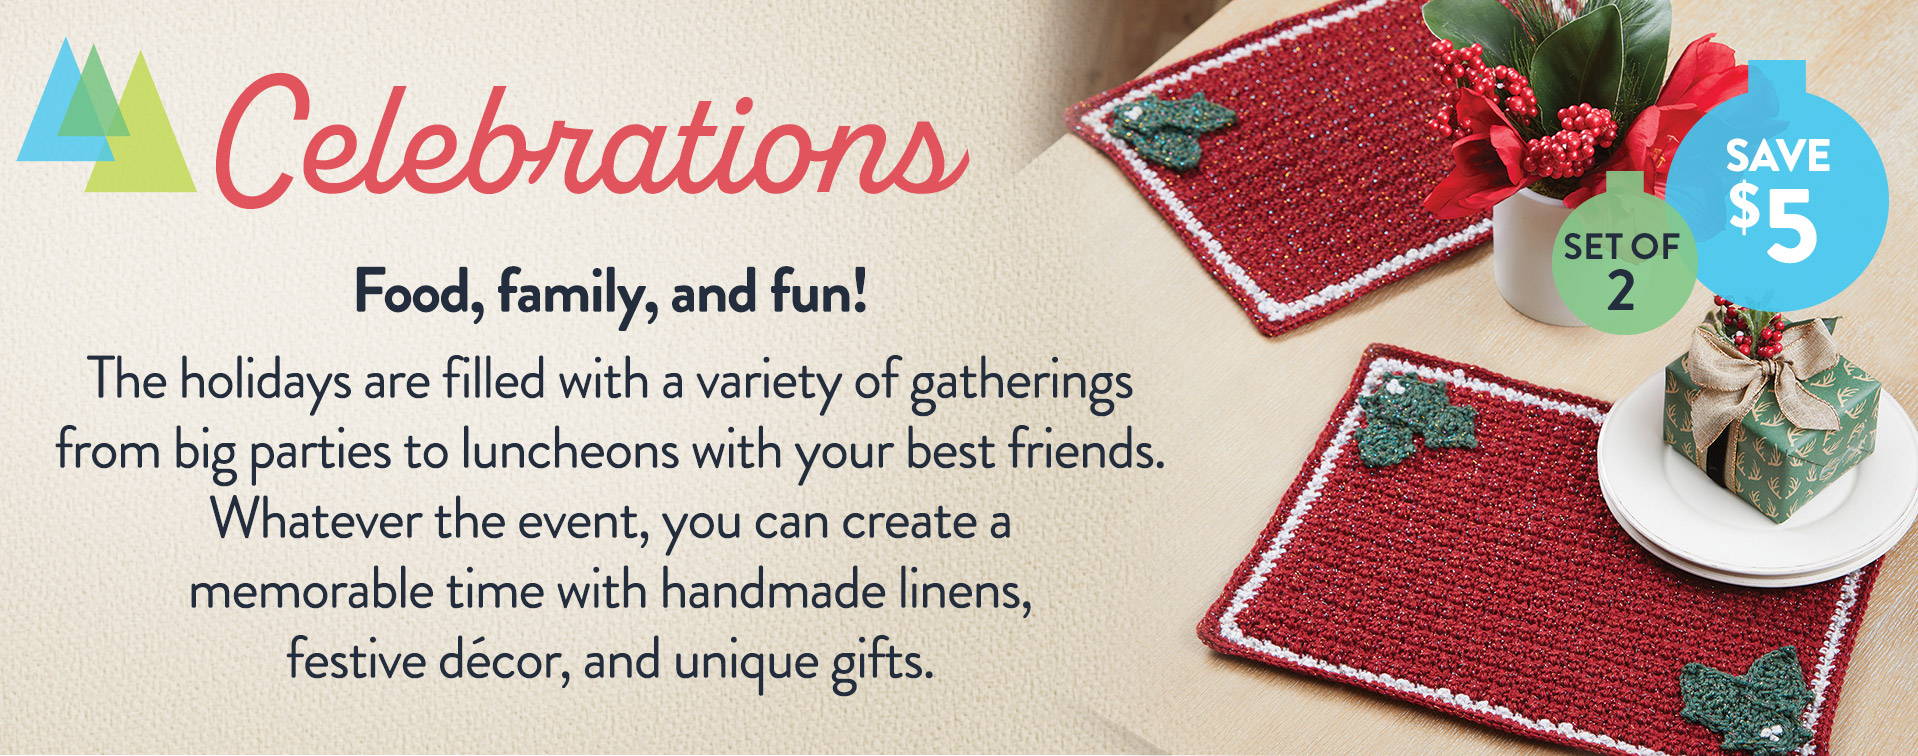 Celebrations - Food, family, and fun! The holidays are filled with a variety of gatherings from big parties to luncheons with your best friends. Whatever the event, you can create a memorable time with handmade linens, festive décor, and unique gifts.